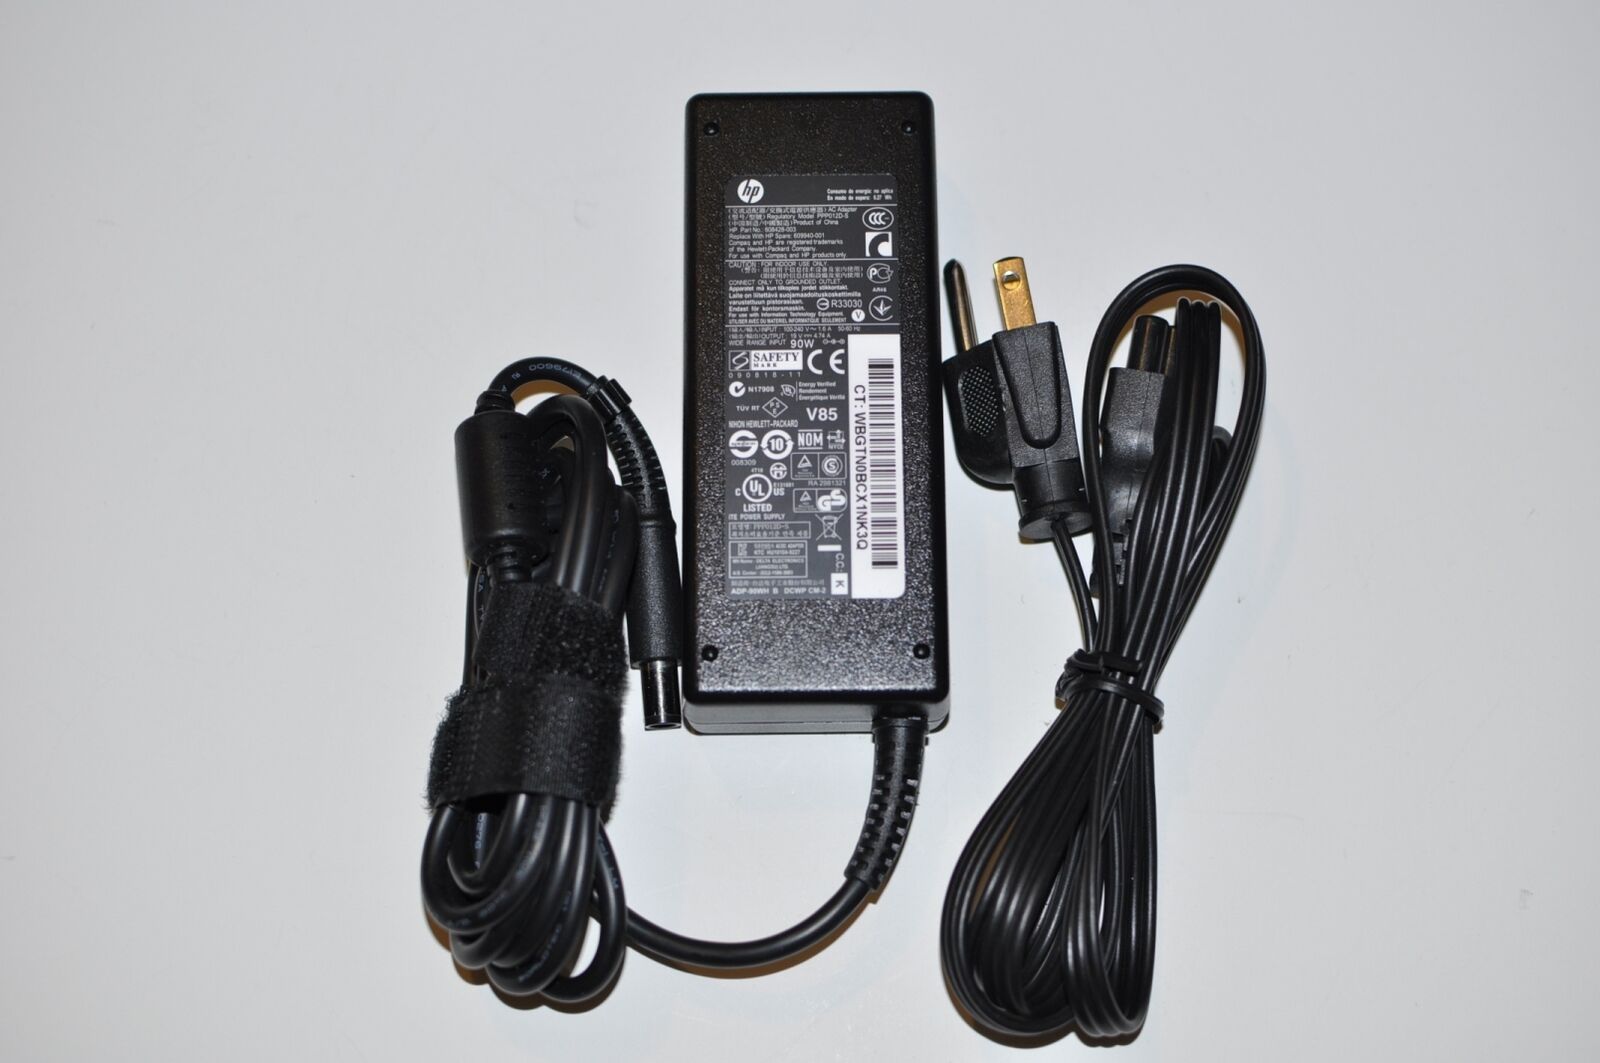 NEW Genuine OEM Power Charger for HP ProBook 4515s 4510s 4430s 4425s 